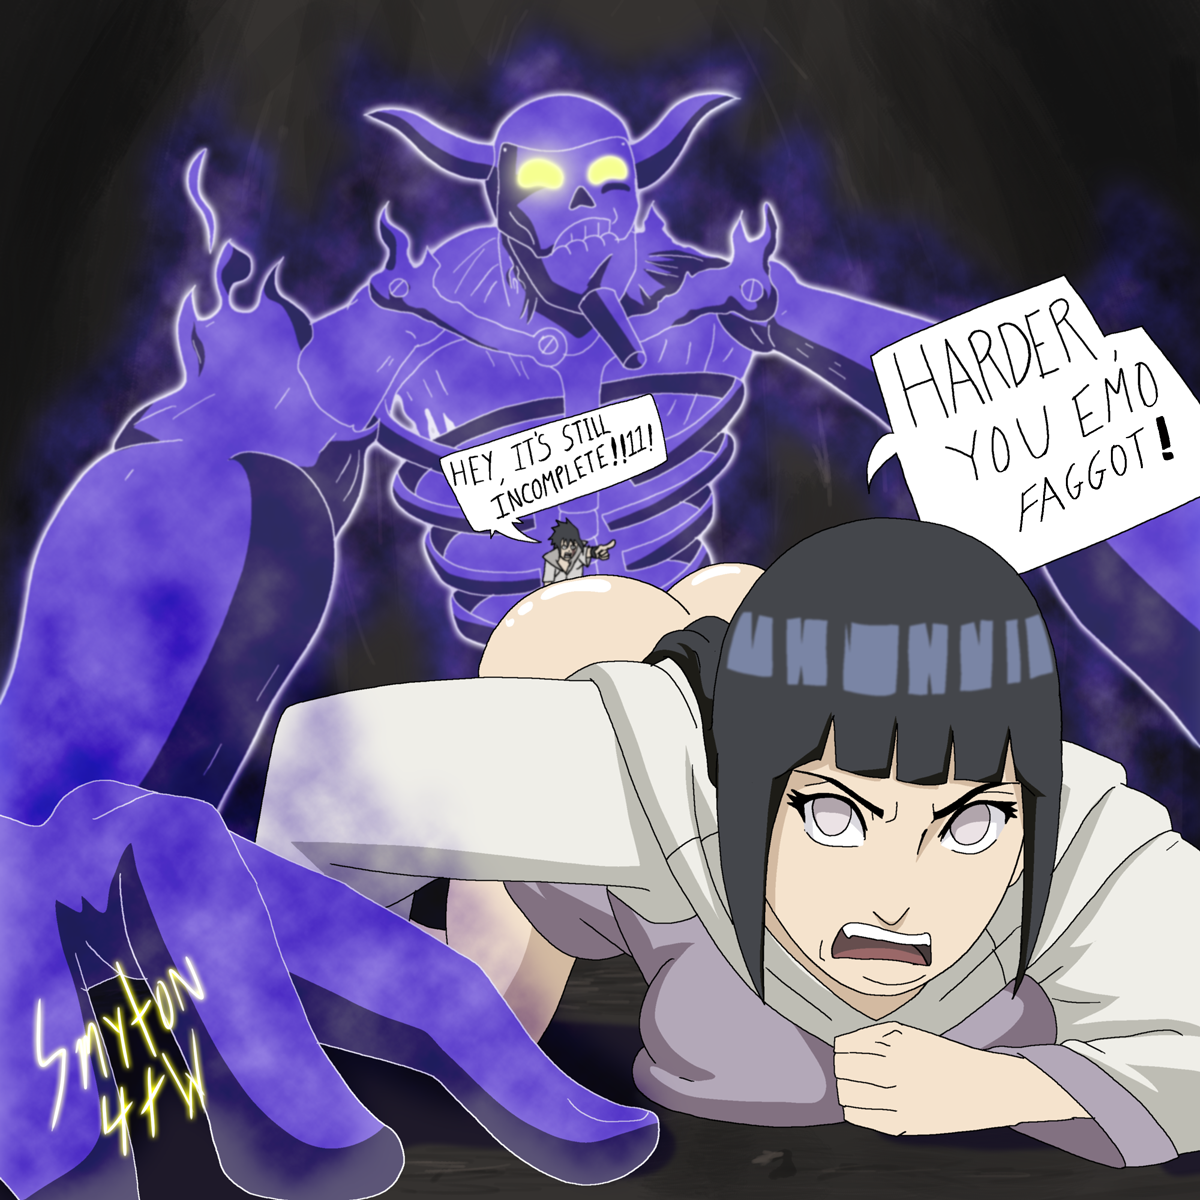 sasuke and hinata porn intended for showing images for naruto susanoo porn xxx